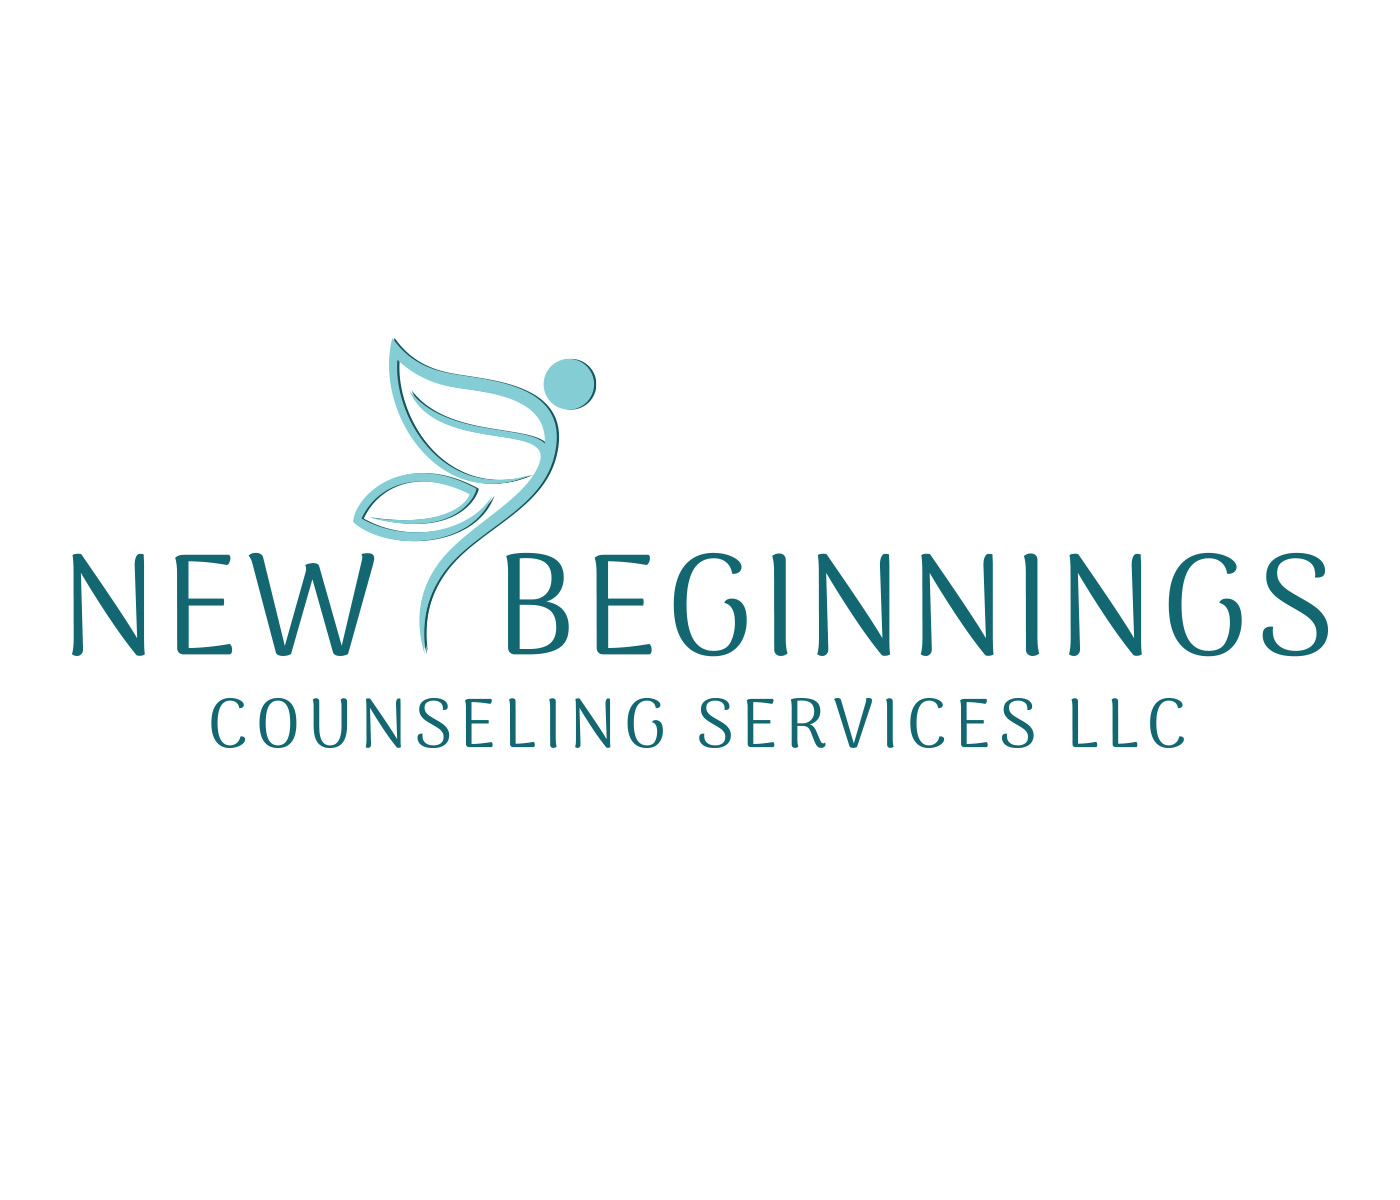 Logo Design Contest for Everwell Counseling, LLC | Hatchwise